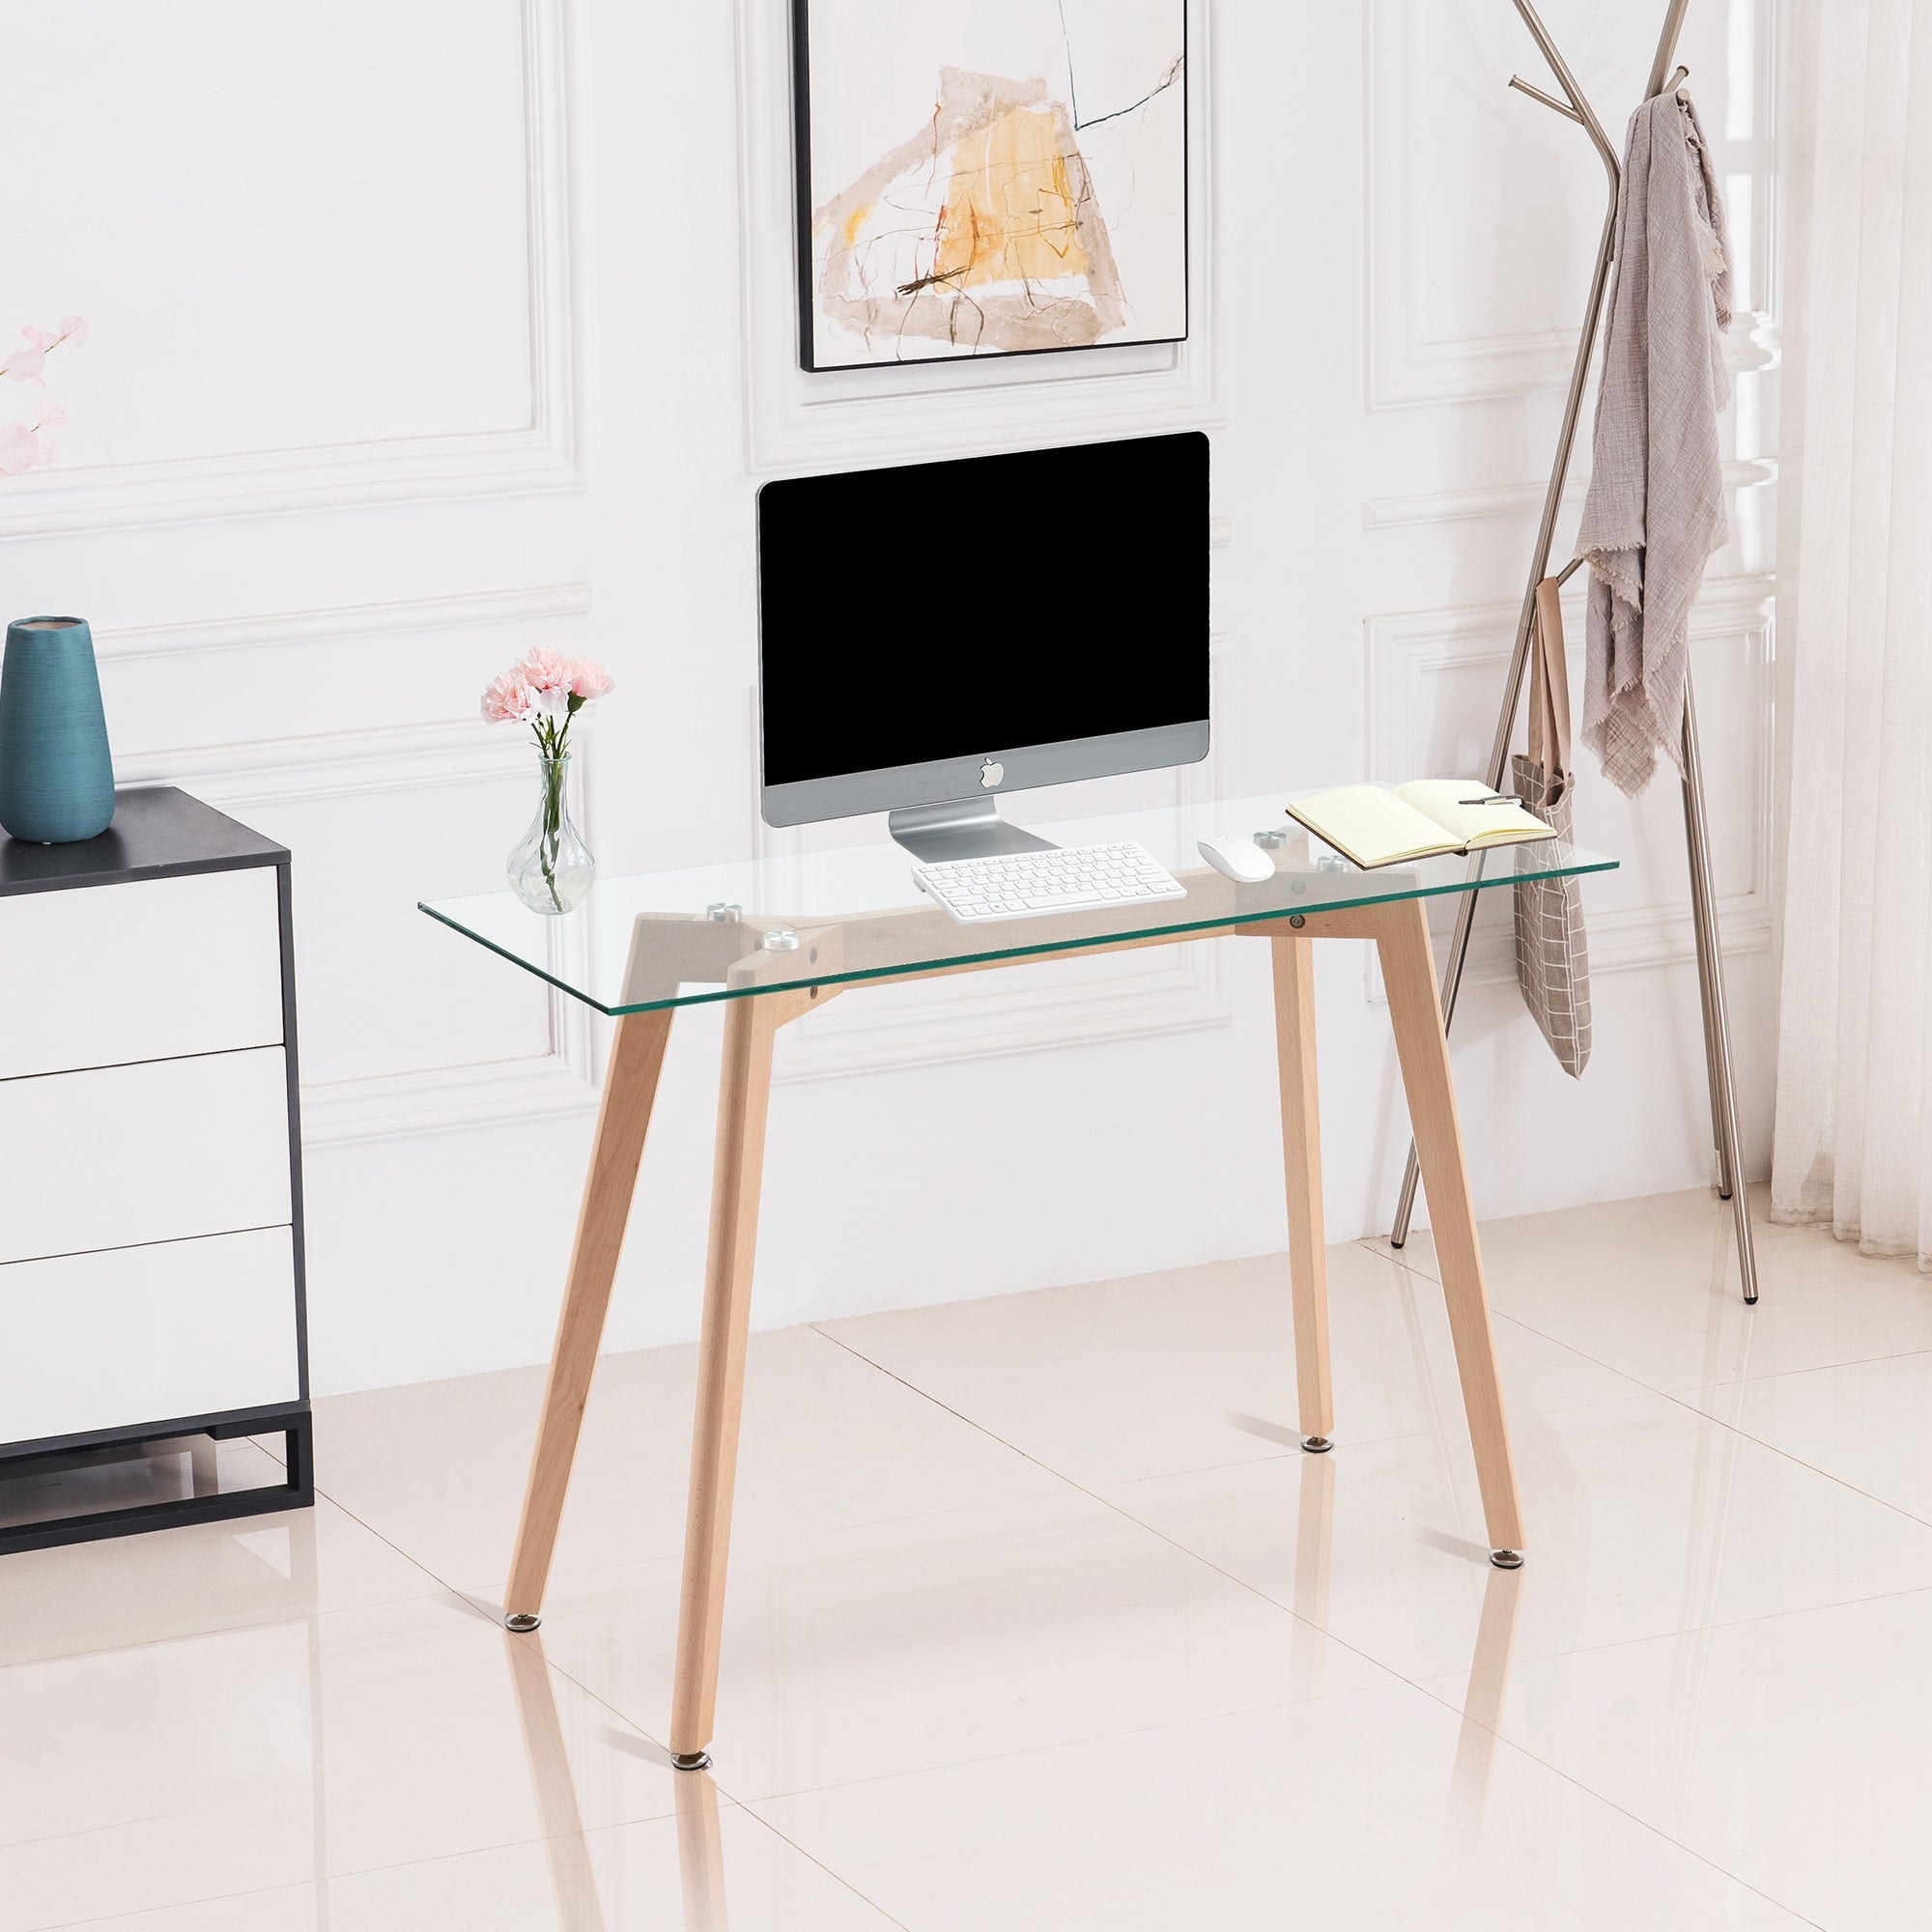 https://ak1.ostkcdn.com/images/products/is/images/direct/3781f11d4dc459f74f98c2fd7c9be9dbacdbfe68/ivinta-Home-Office-Desk%2C-40-inch-Simple-Computer-Desk%2C-Small-Writing-Table-for-Saving-Space%2C-Sturdy-Tempered-Glass-Top-Desk.jpg